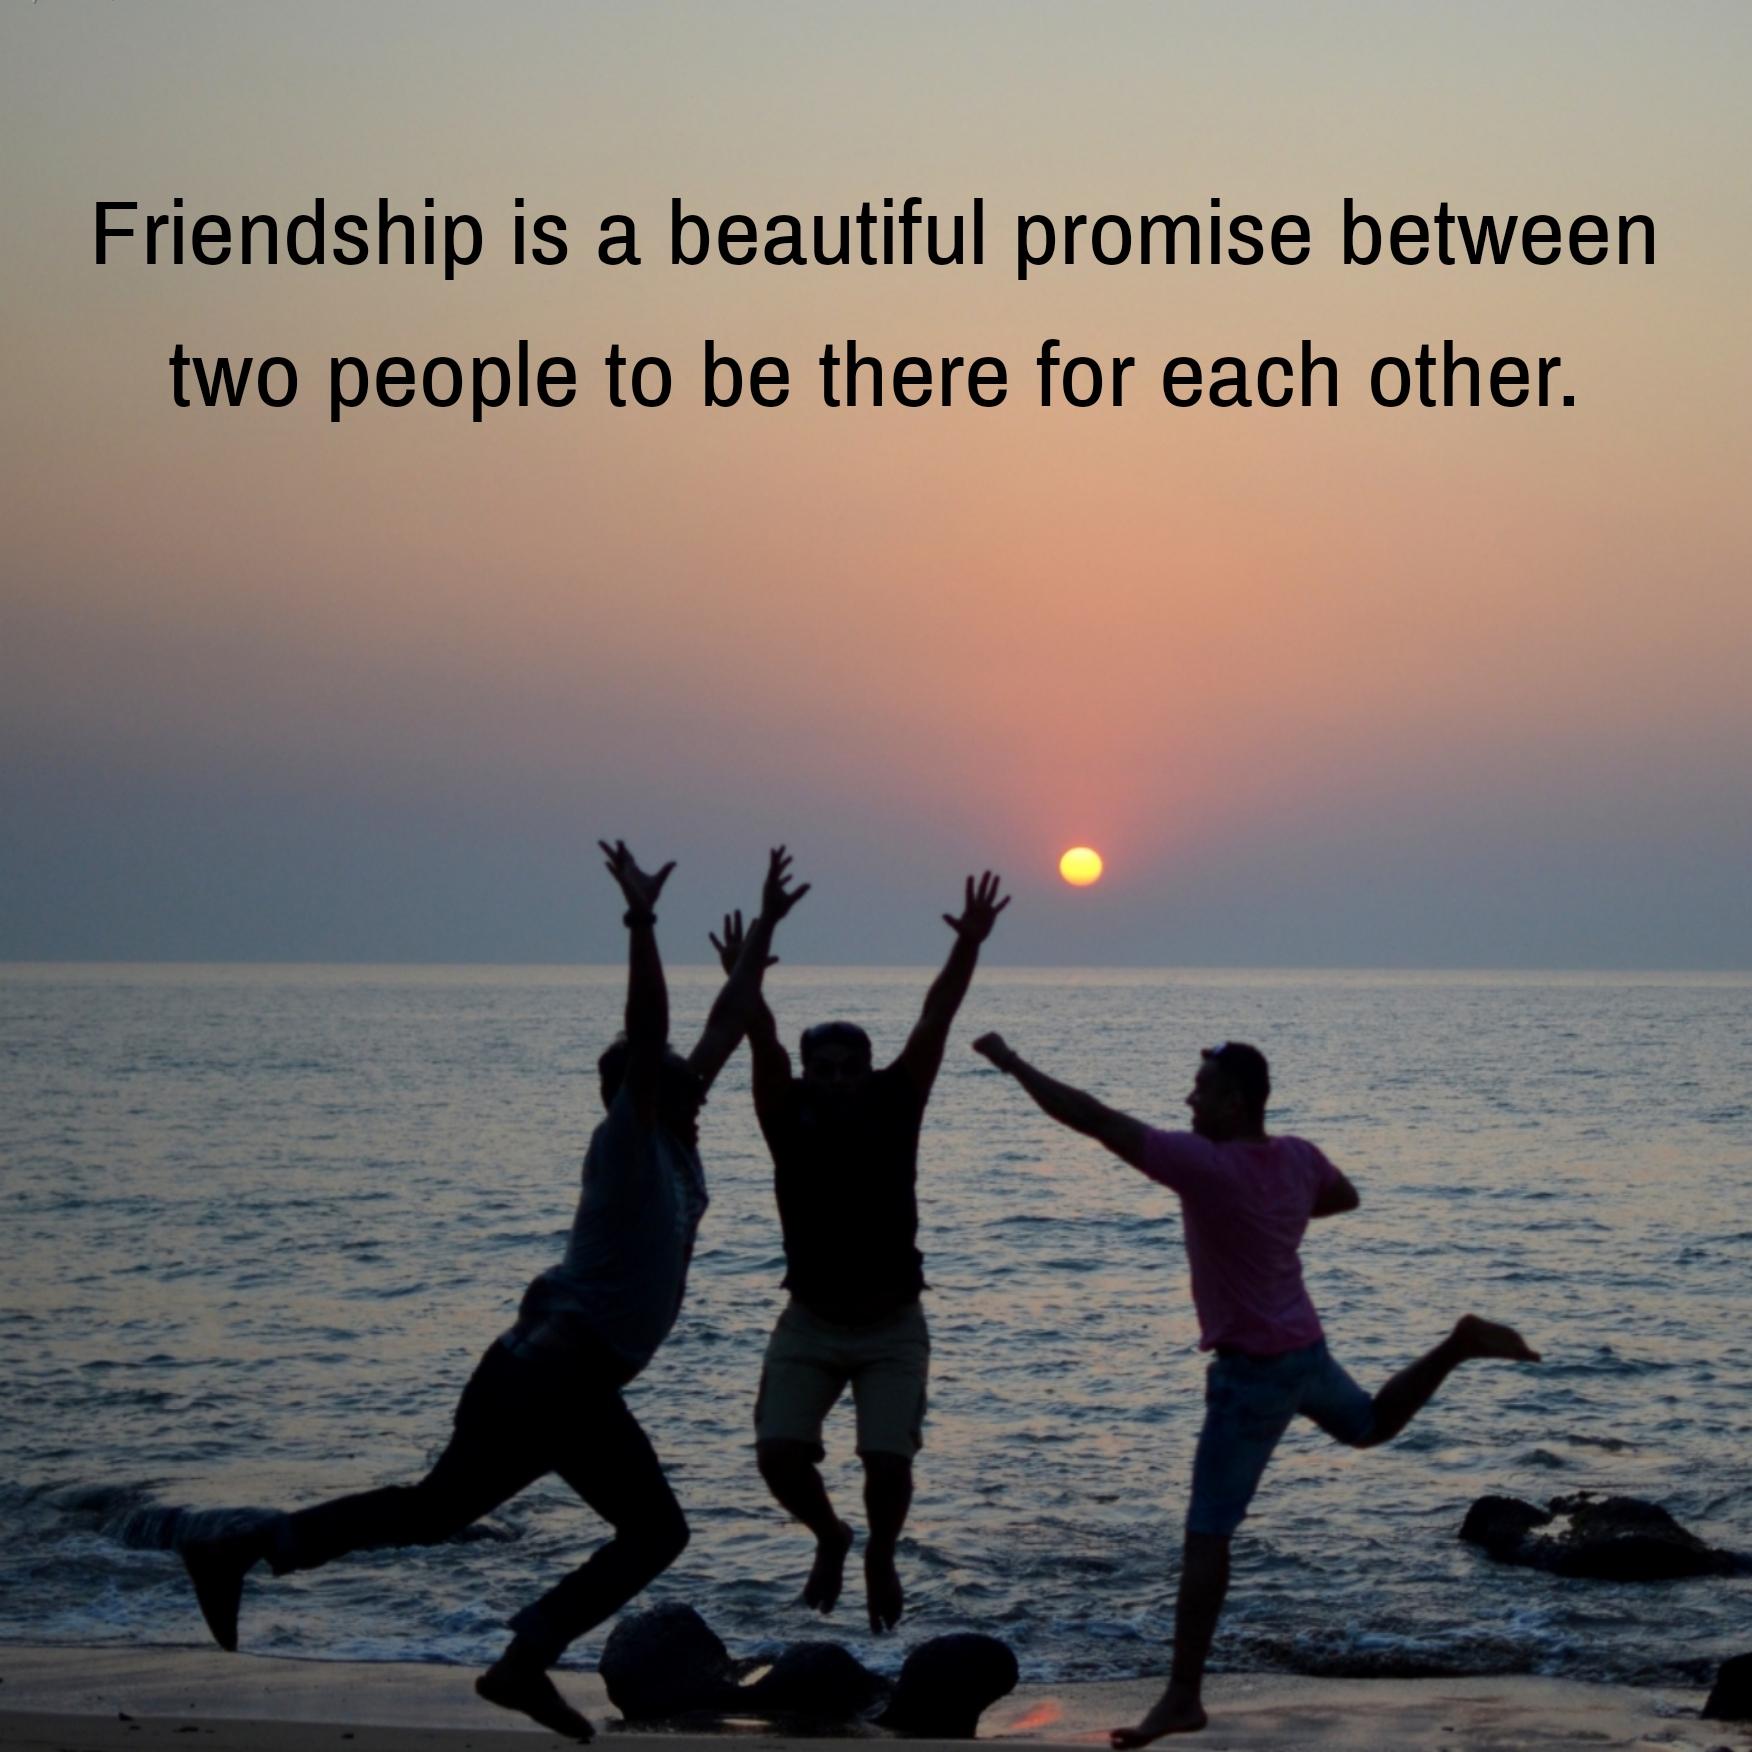 Friendship is a beautiful promise between two people to be there for each other